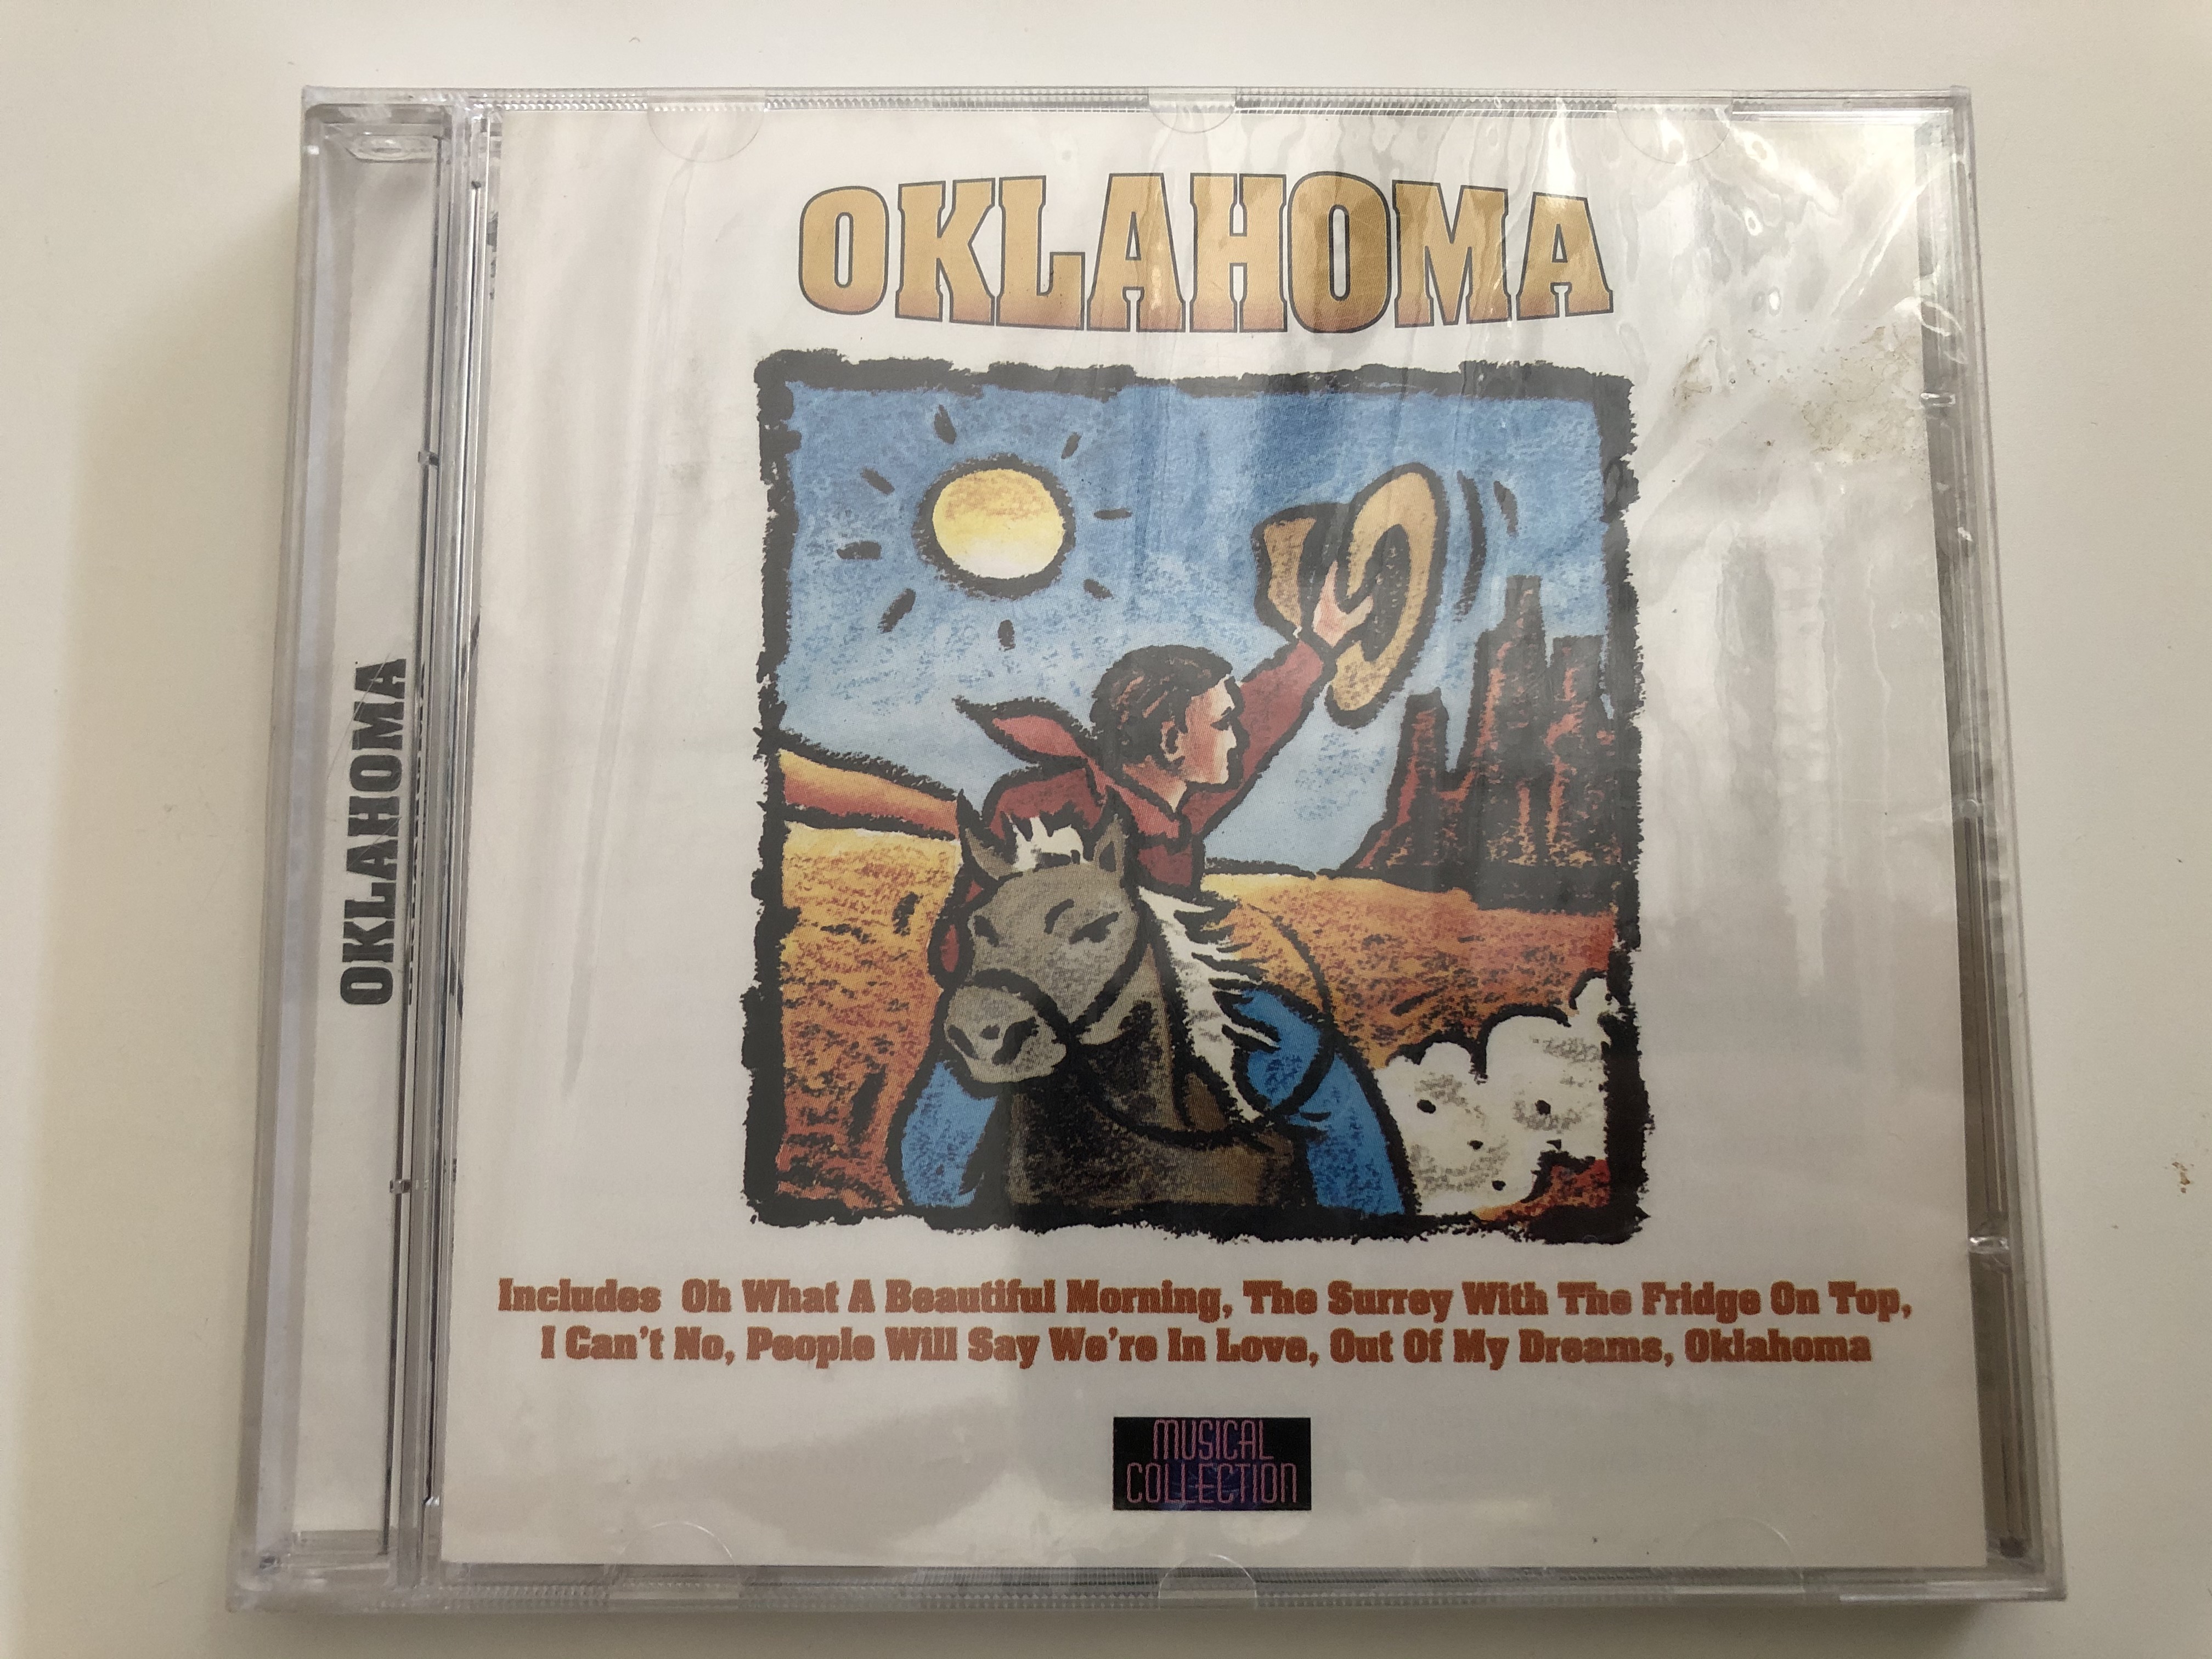 oklahoma-includes-oh-what-a-beautiful-morning-the-surrey-with-the-fridge-on-top-i-can-t-no-people-will-say-we-re-in-love-out-of-my-dreams-oklahoma-musical-collection-audio-cd-8811-2-1-.jpg